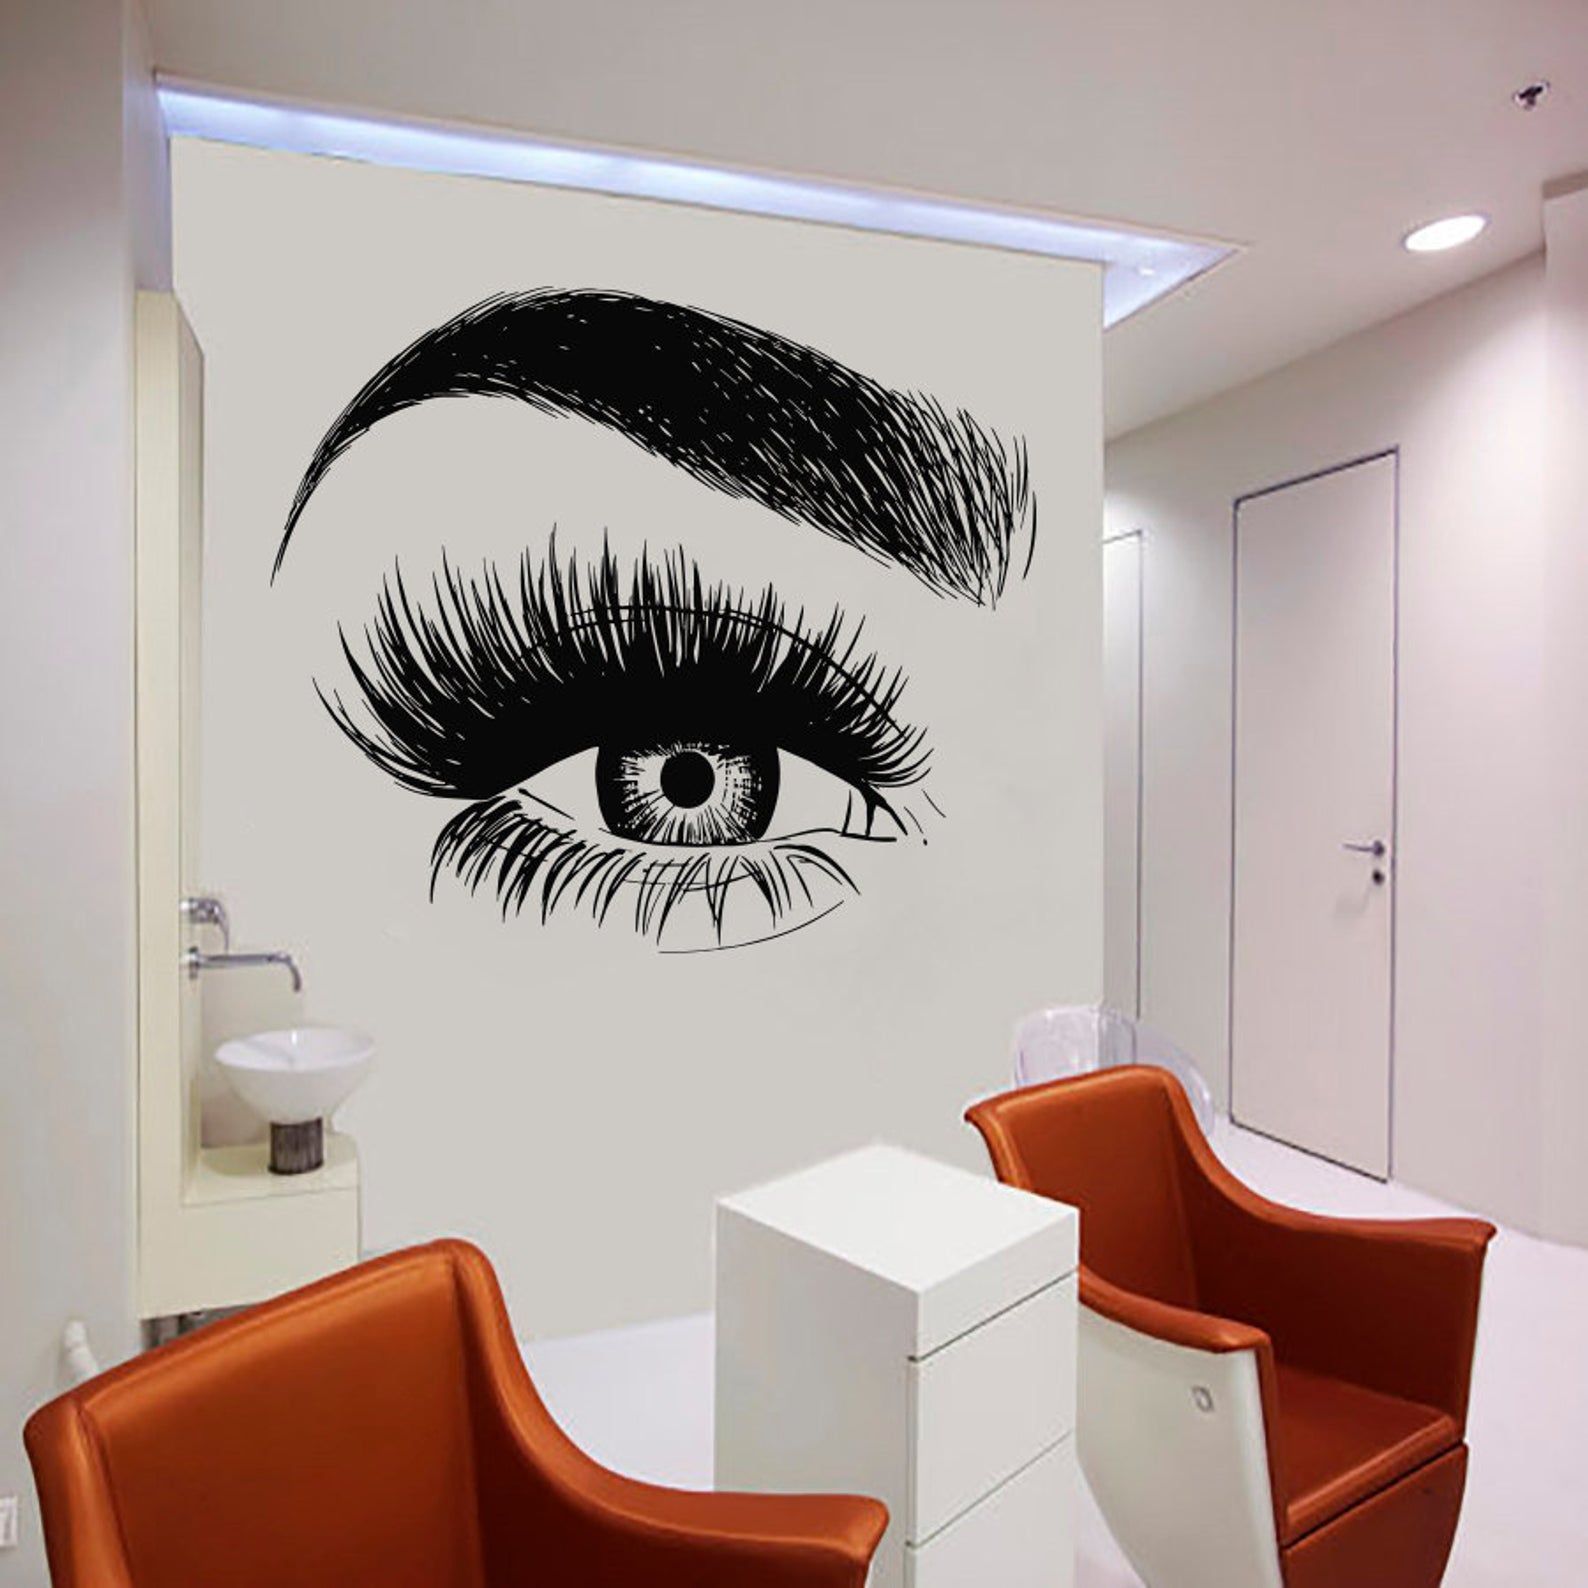 Wall Decal Window Sticker Beauty Salon Woman Face Eyelashes Lashes Eyebrows Brows t43 - Wall Decal Window Sticker Beauty Salon Woman Face Eyelashes Lashes Eyebrows Brows t43 -   15 beauty Salon woman ideas